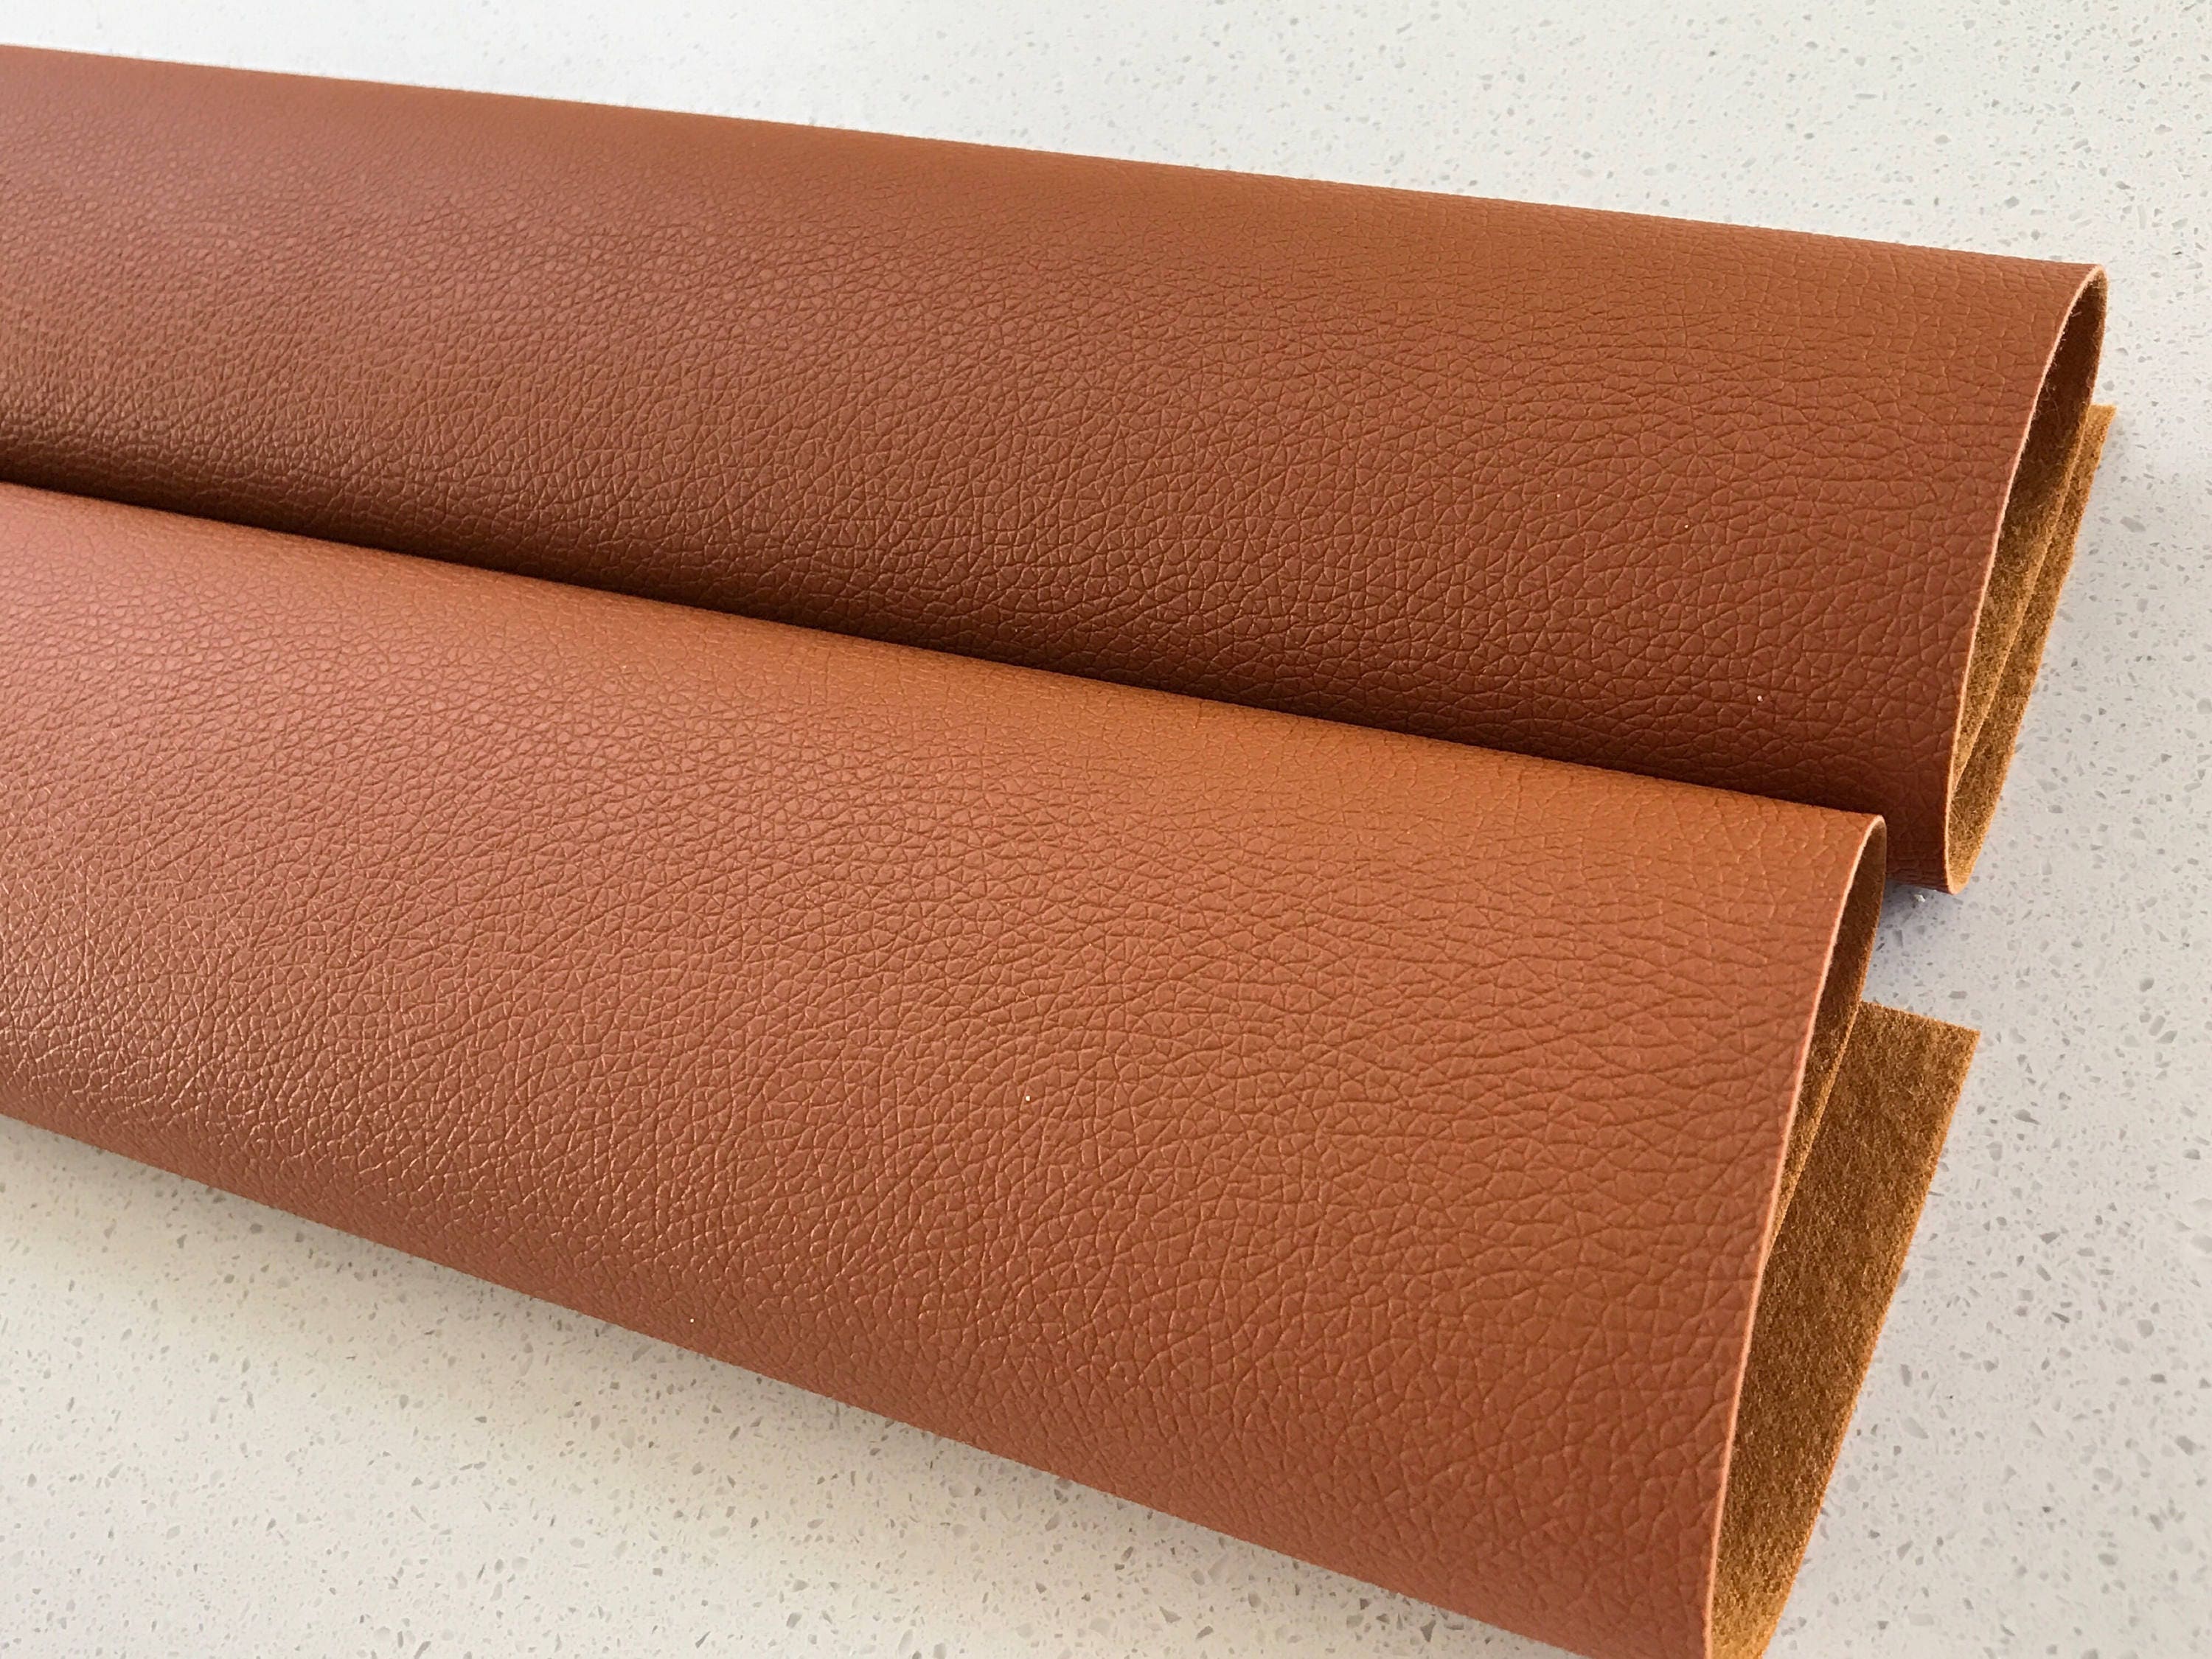 Faux Leather Sheet for Glowforge, Laser Engraver, Cricut, or Craft Supplies  12 X 24 